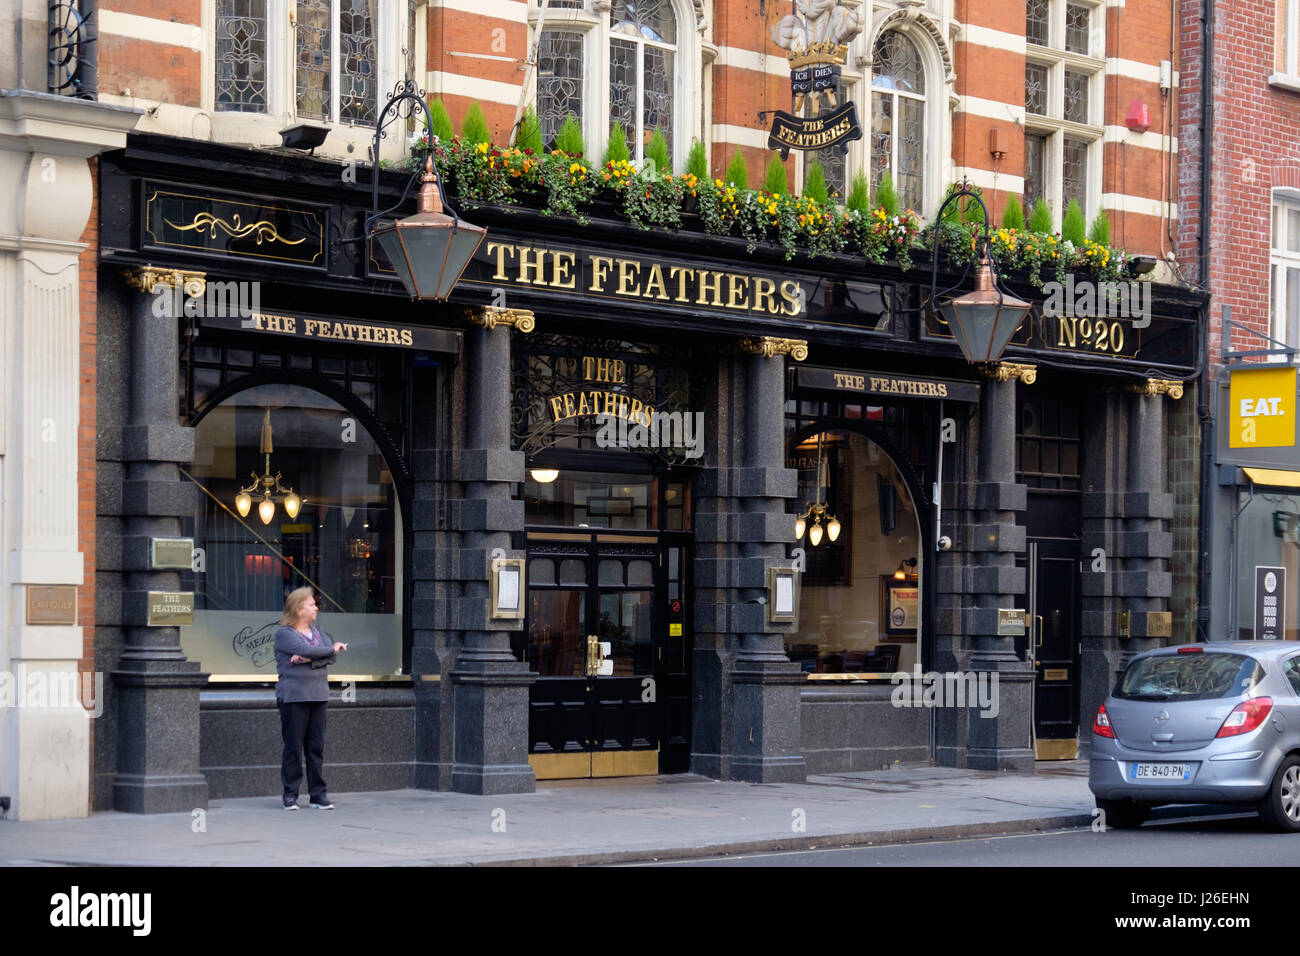 Woman smoking outside The Feathers pub in London, England, UK, Europe Stock Photo